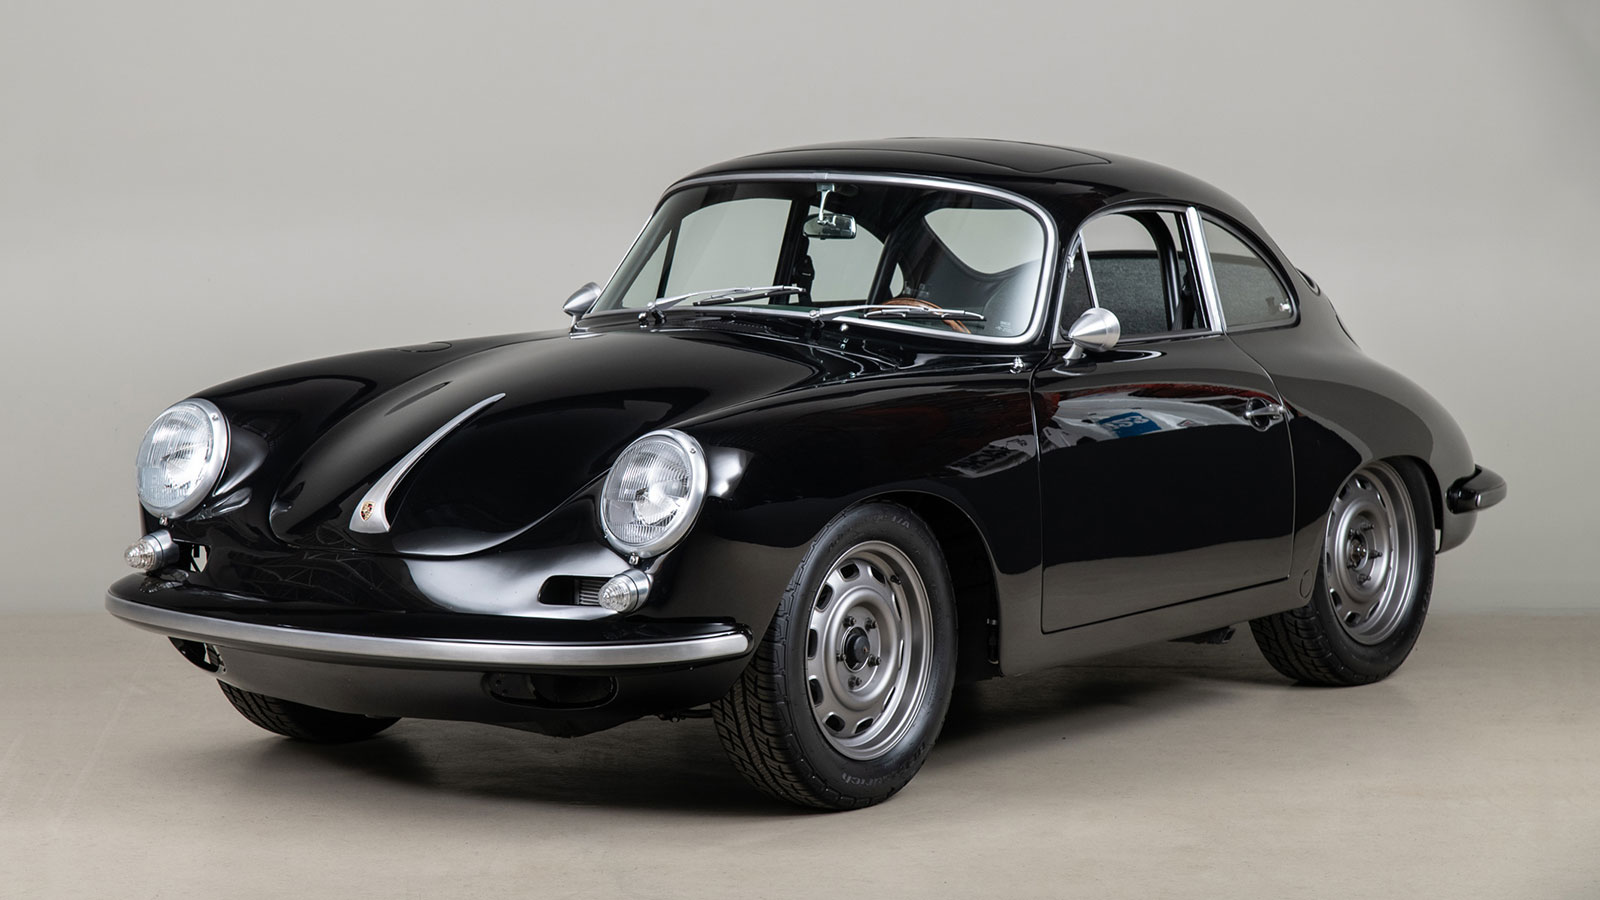 Porsche enthusiasts refer to cars with modifications as "outlaw.&a...